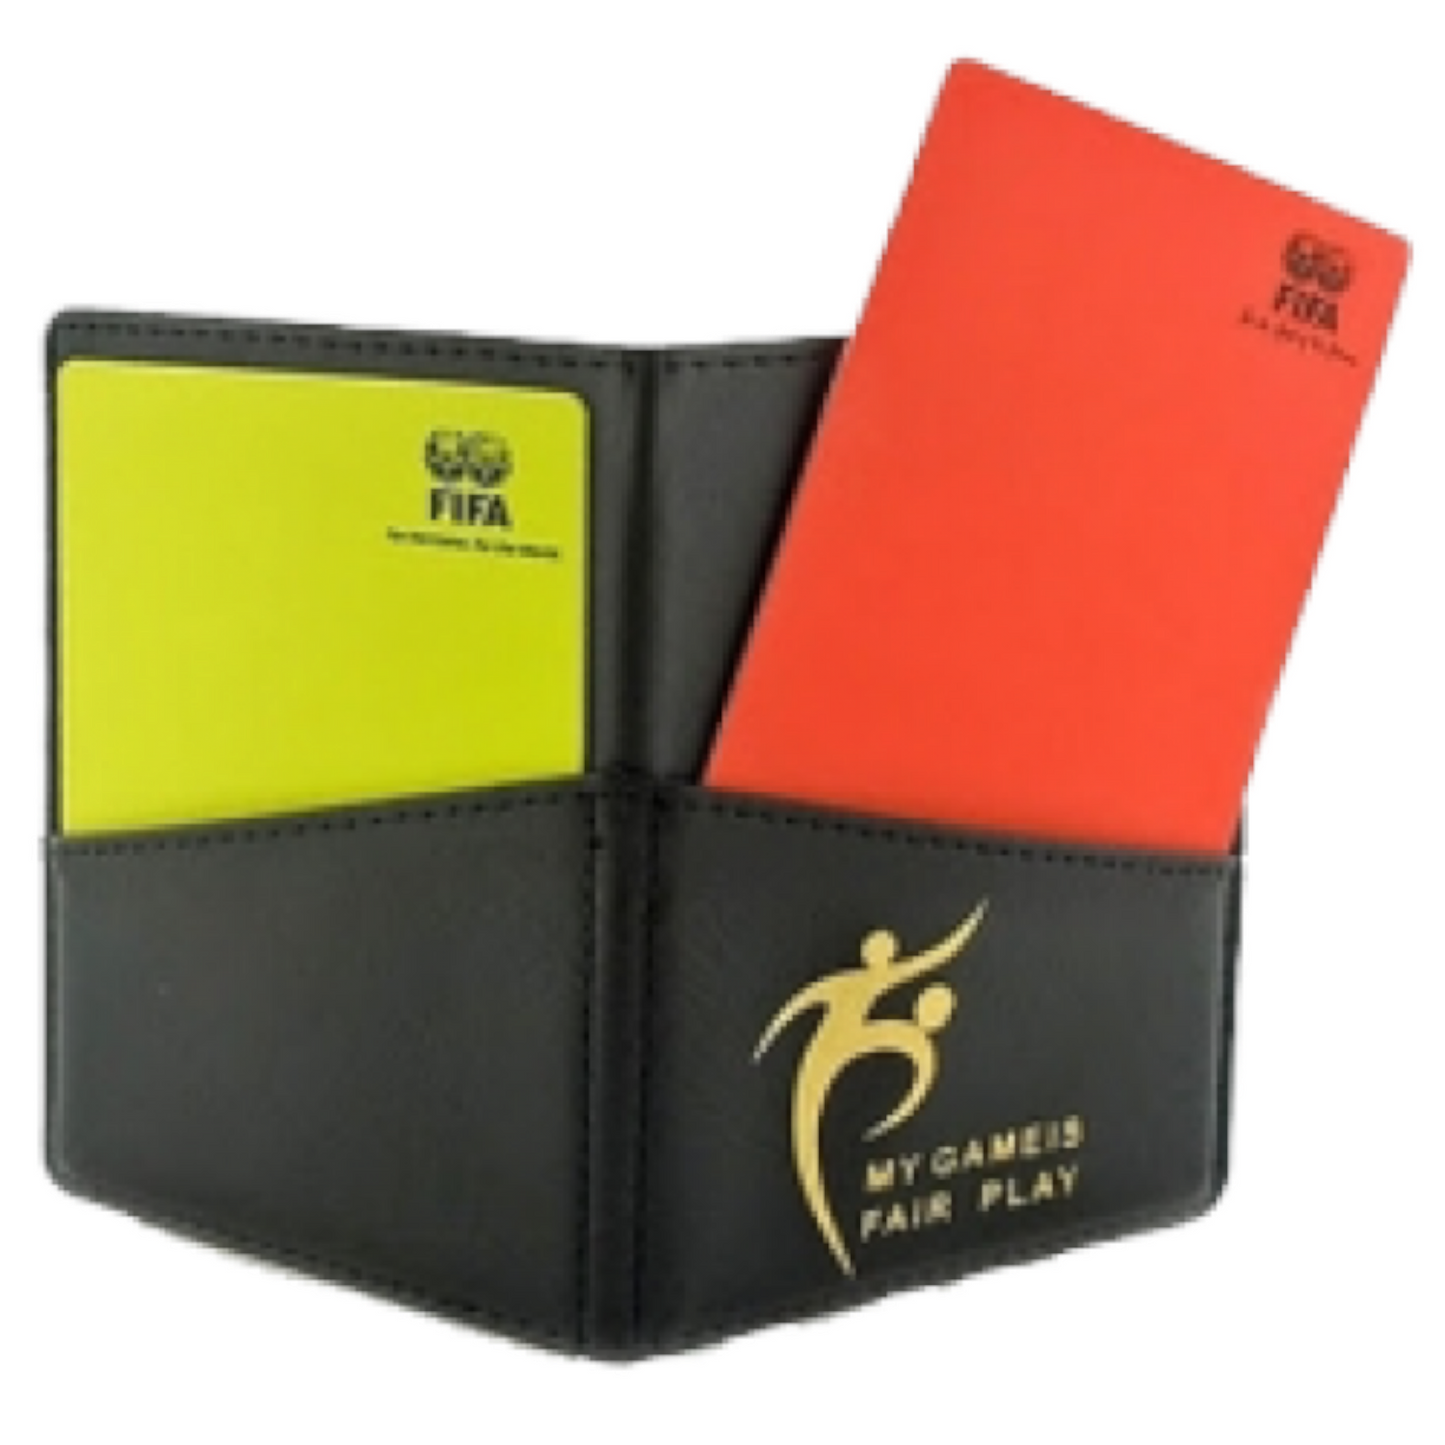 Referee Wallets & Cards (FIFA Styled)